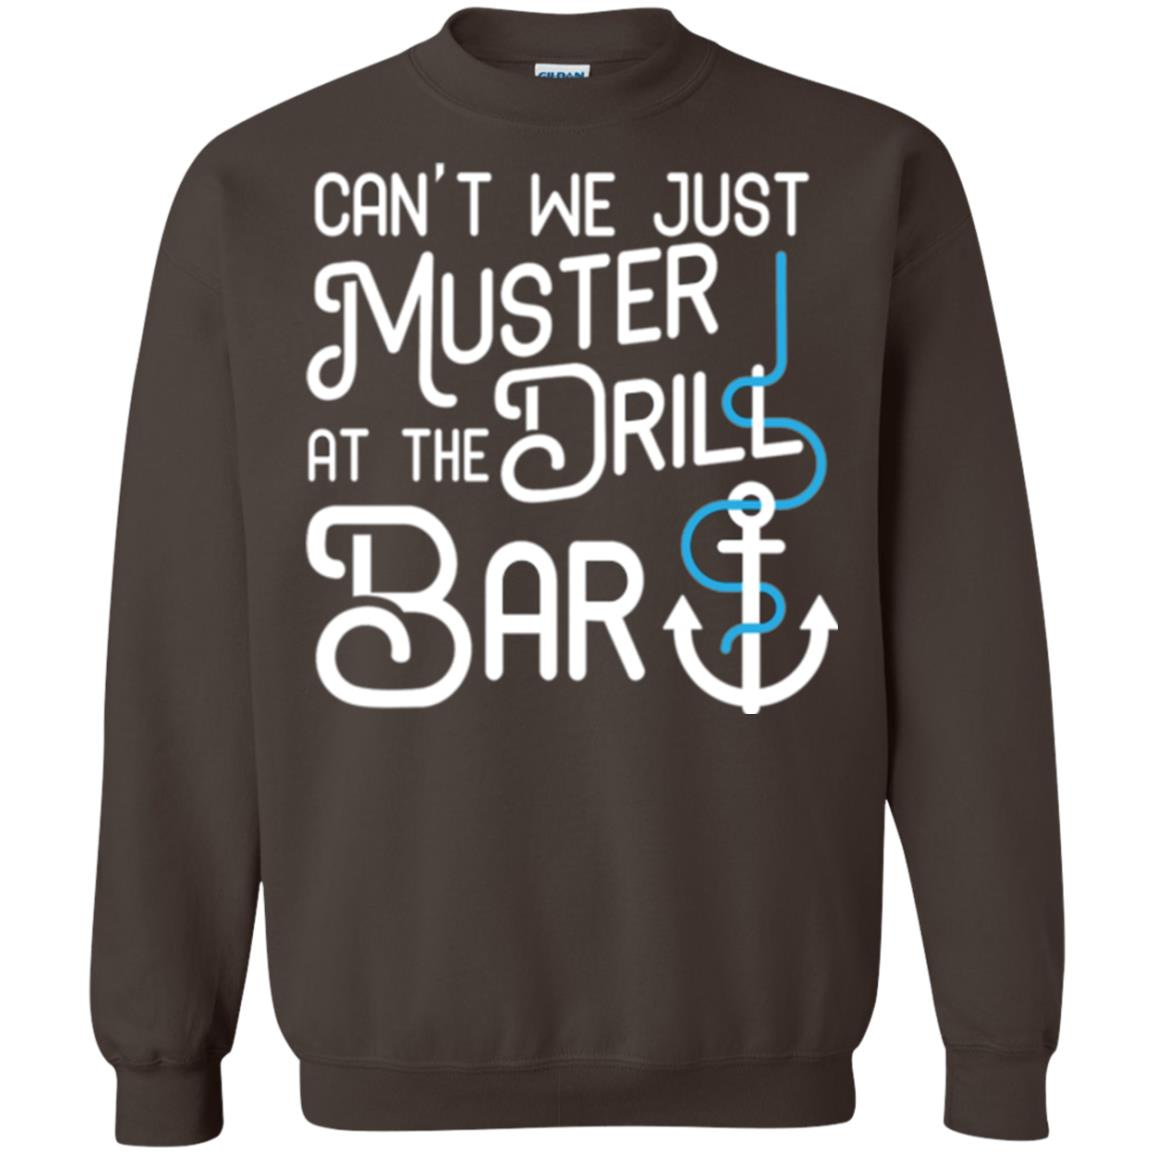 Inktee Store - Funny Cruise T Shirt Muster Drill At The Bar Sweatshirt Image